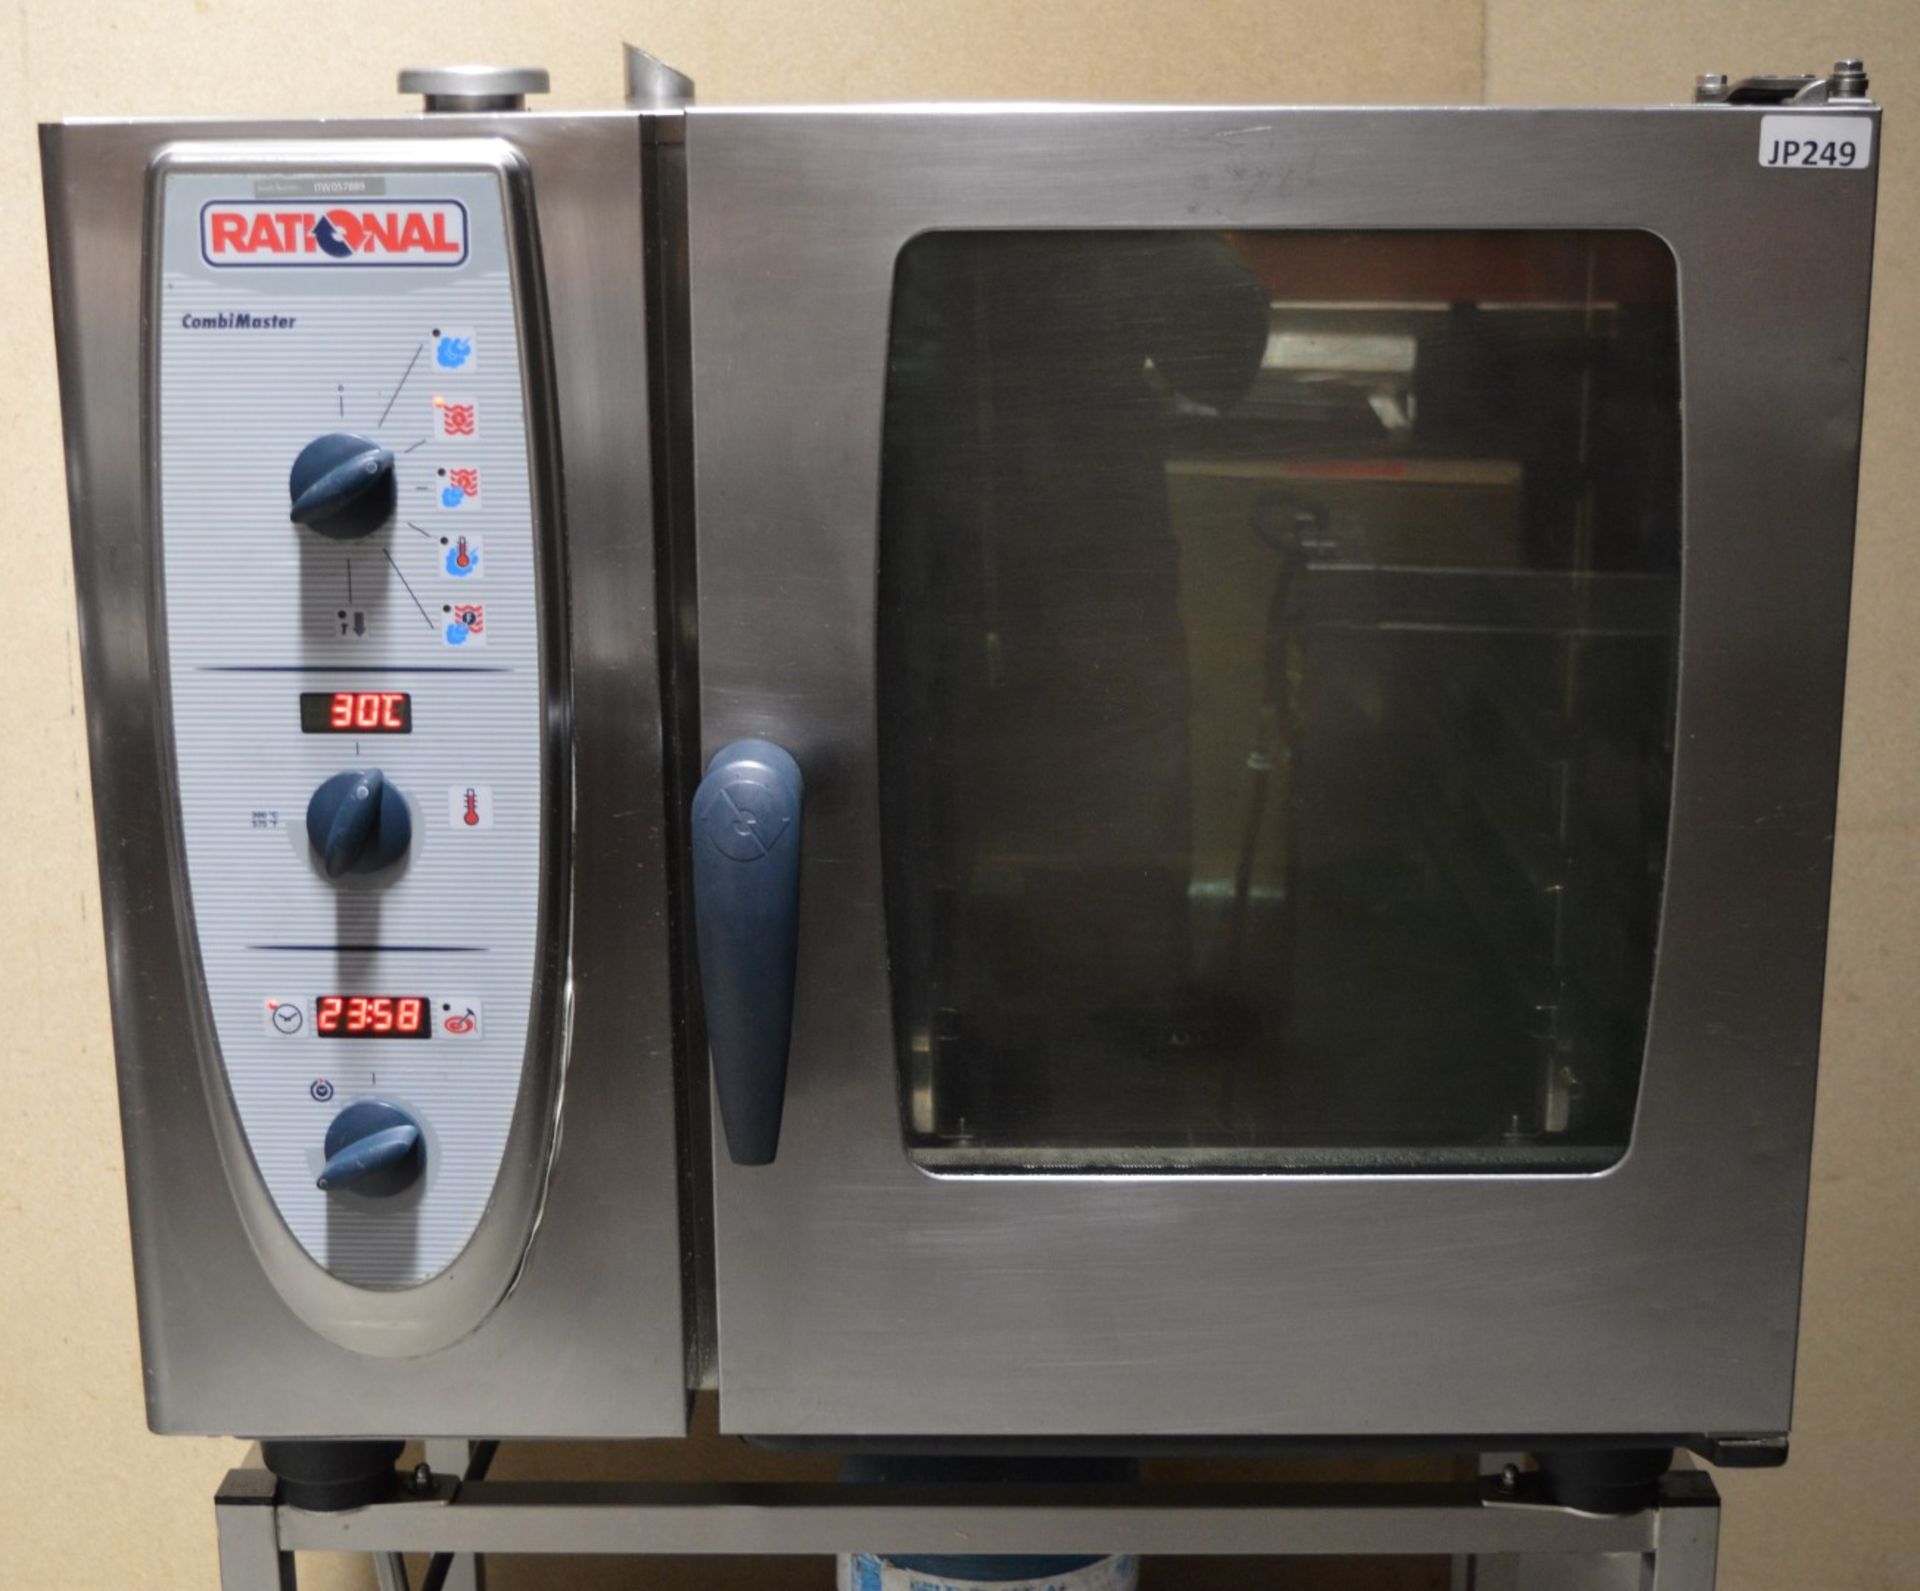 1 x Rational CombiMaster 6 Grid Combi Oven With Stand - CL232 - 3 Phase - H146x W85 x D82 cms - - Image 2 of 11